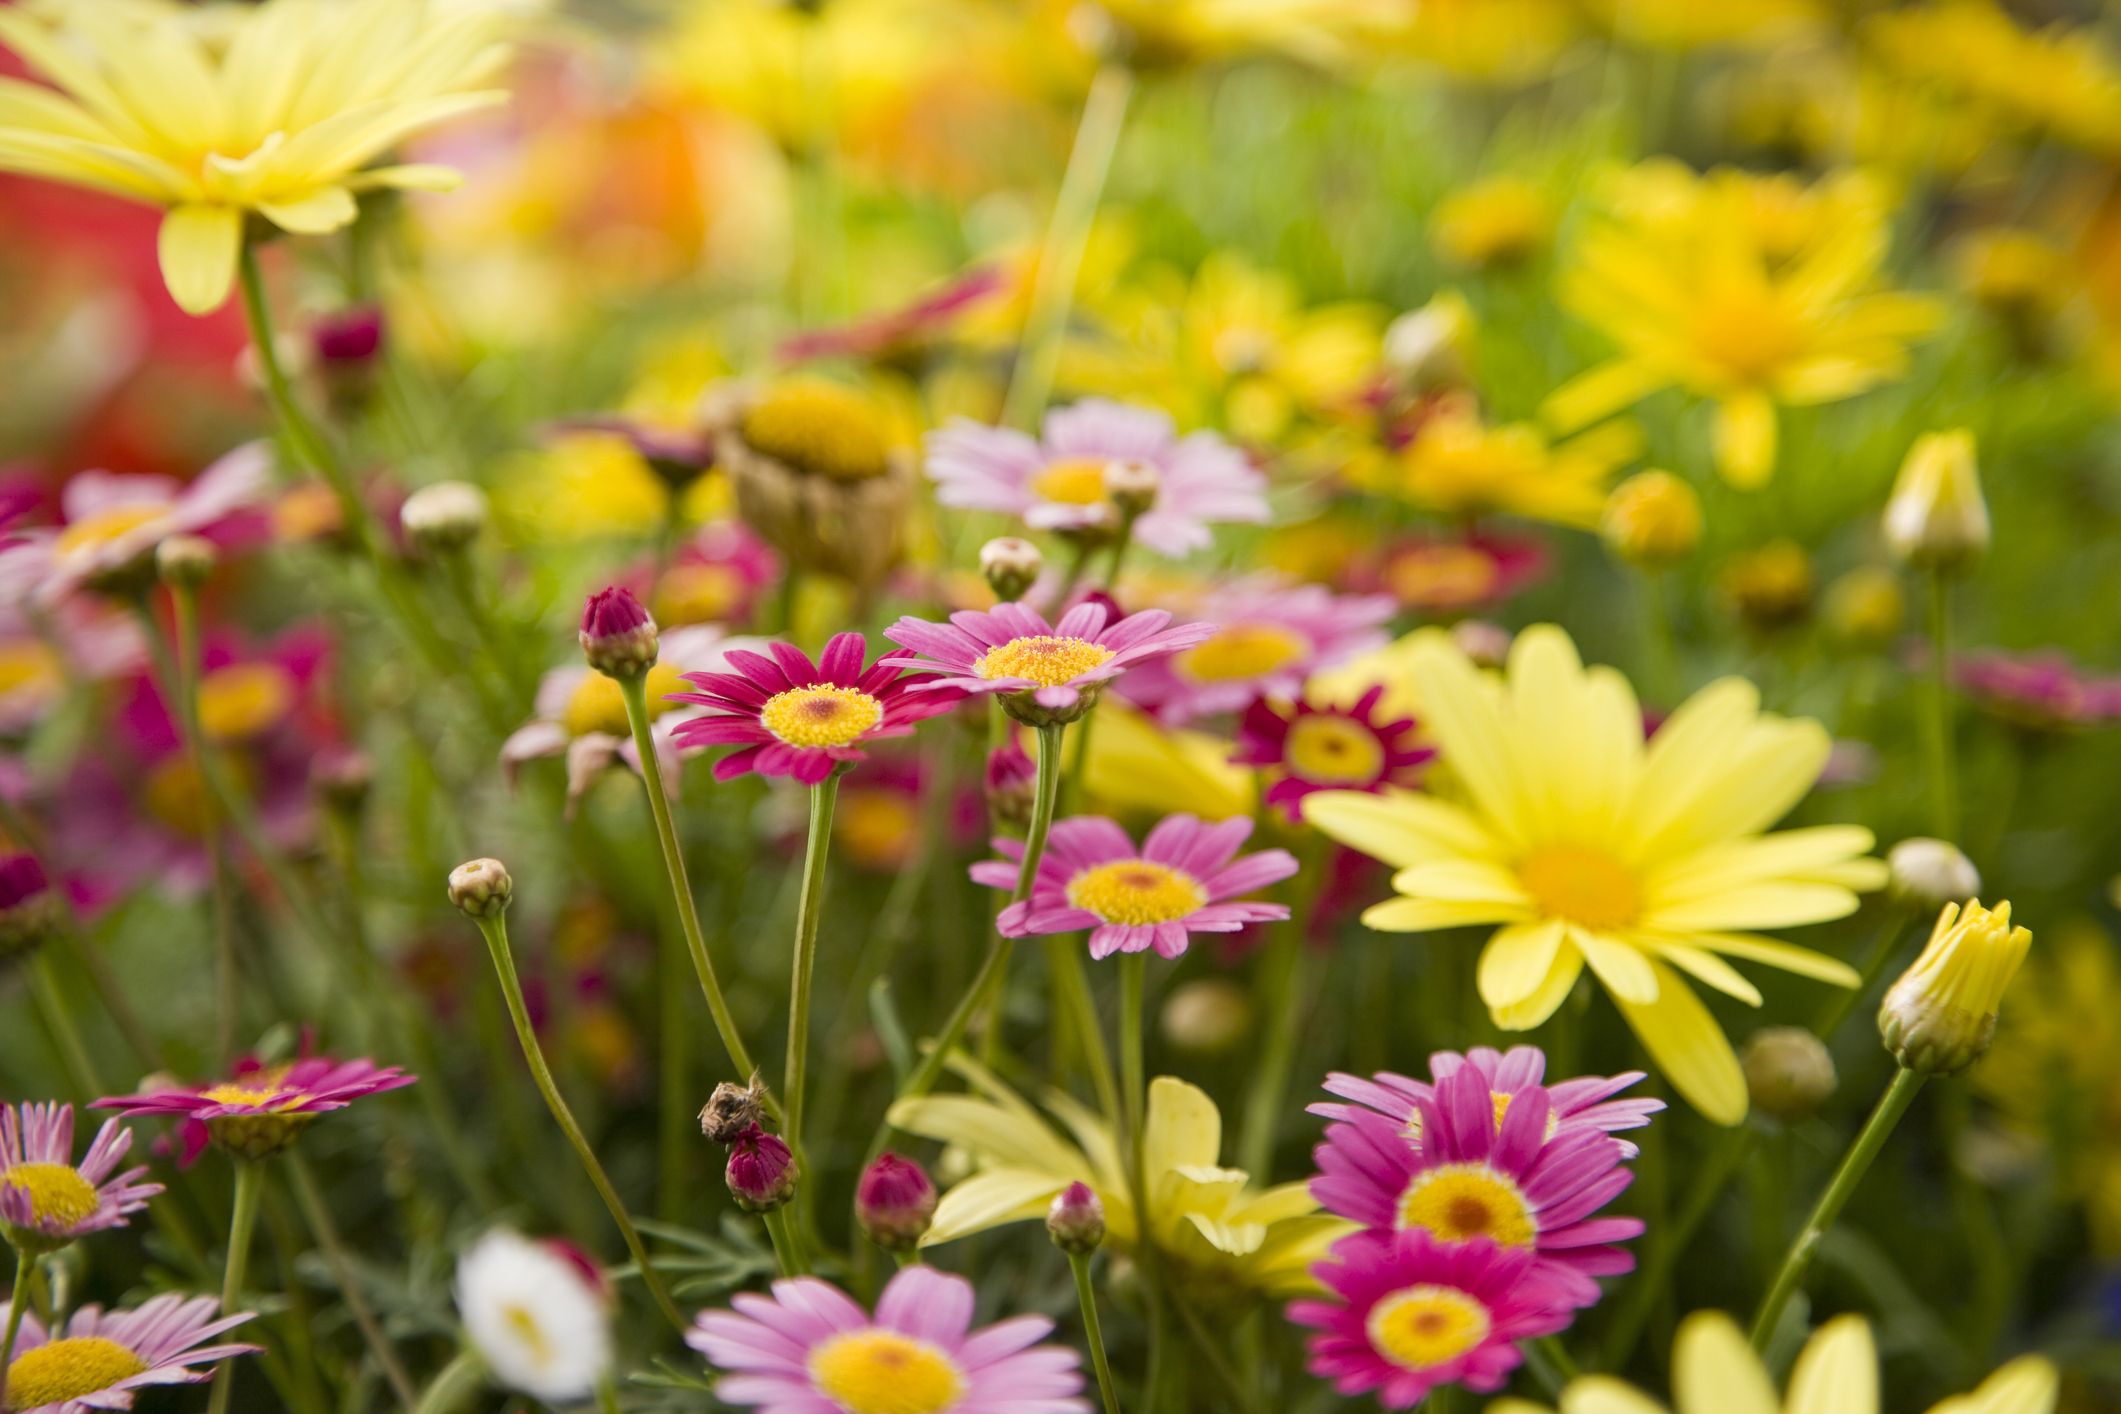 25 Colorful Types Of Daisies - Daisy Varieties For Your Garden.